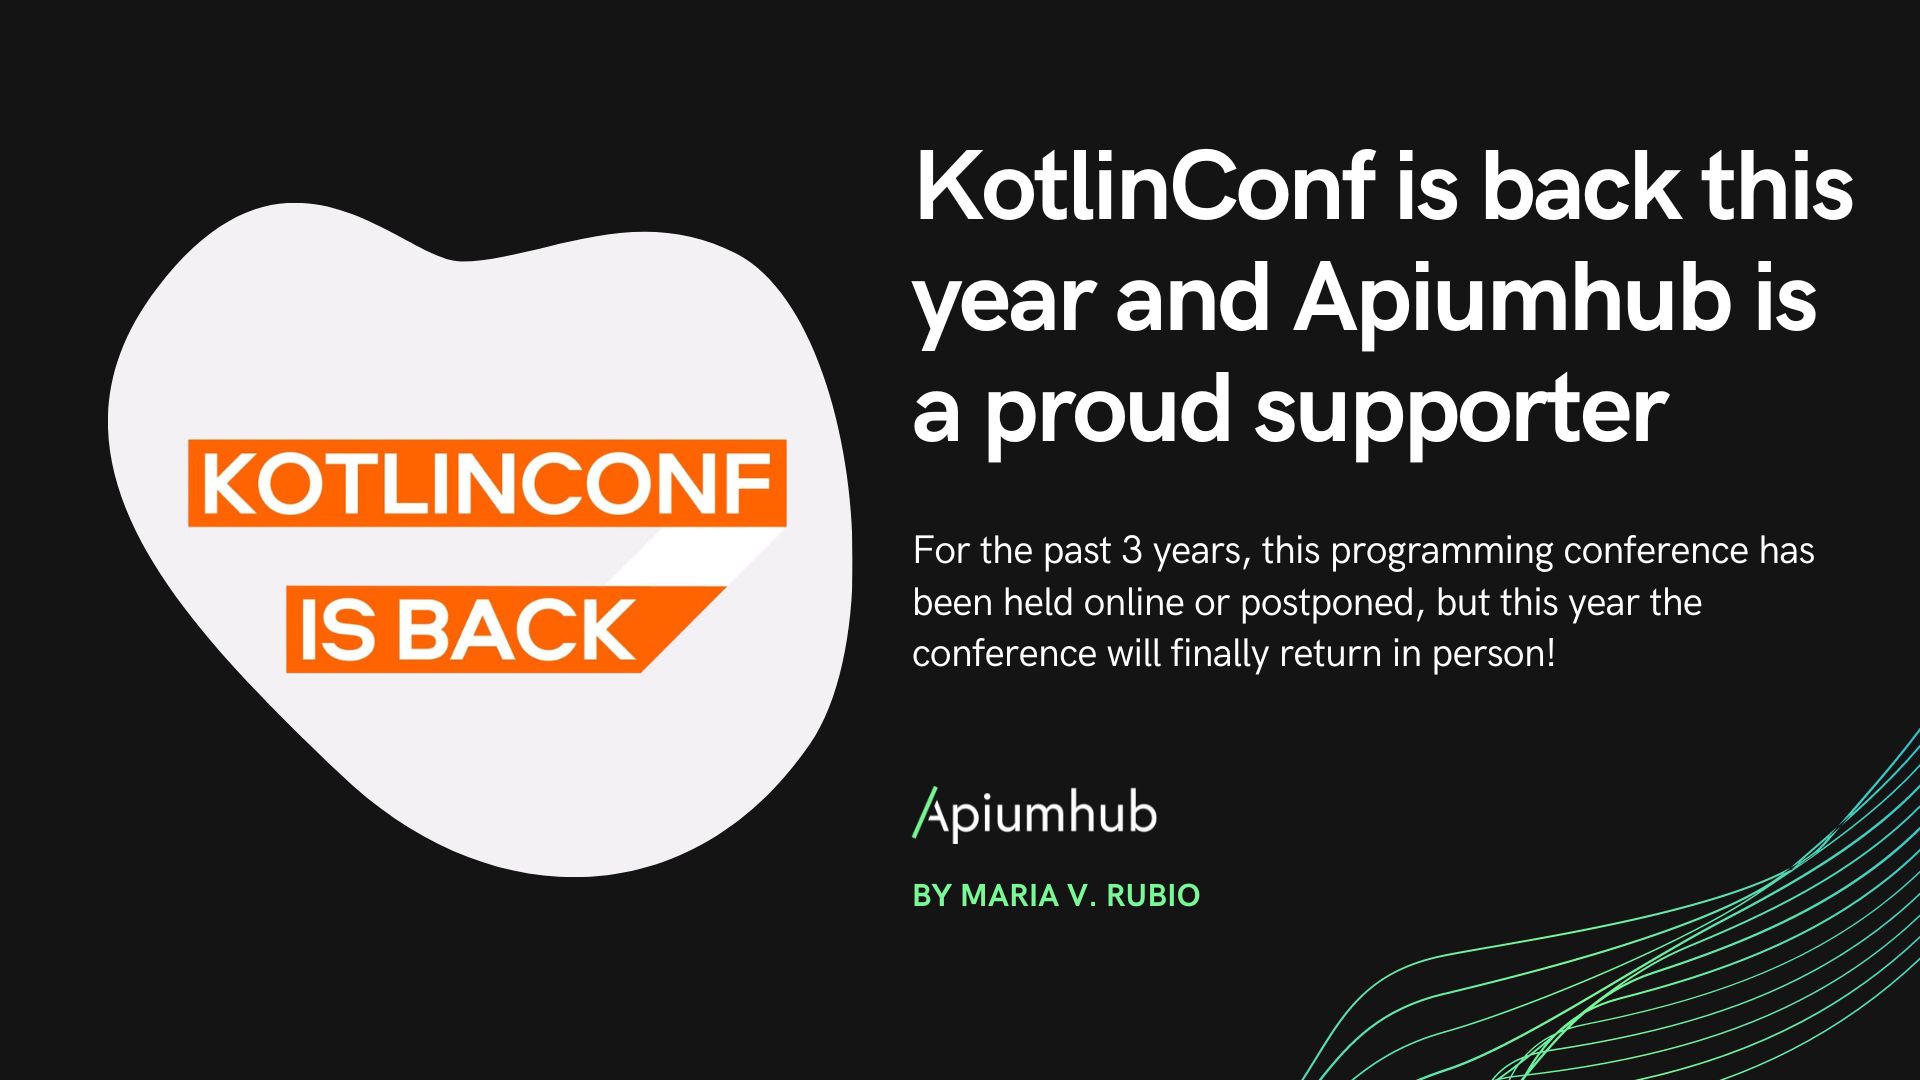 Kotlinconf is back in 2023 and Apiumhub is a supporter